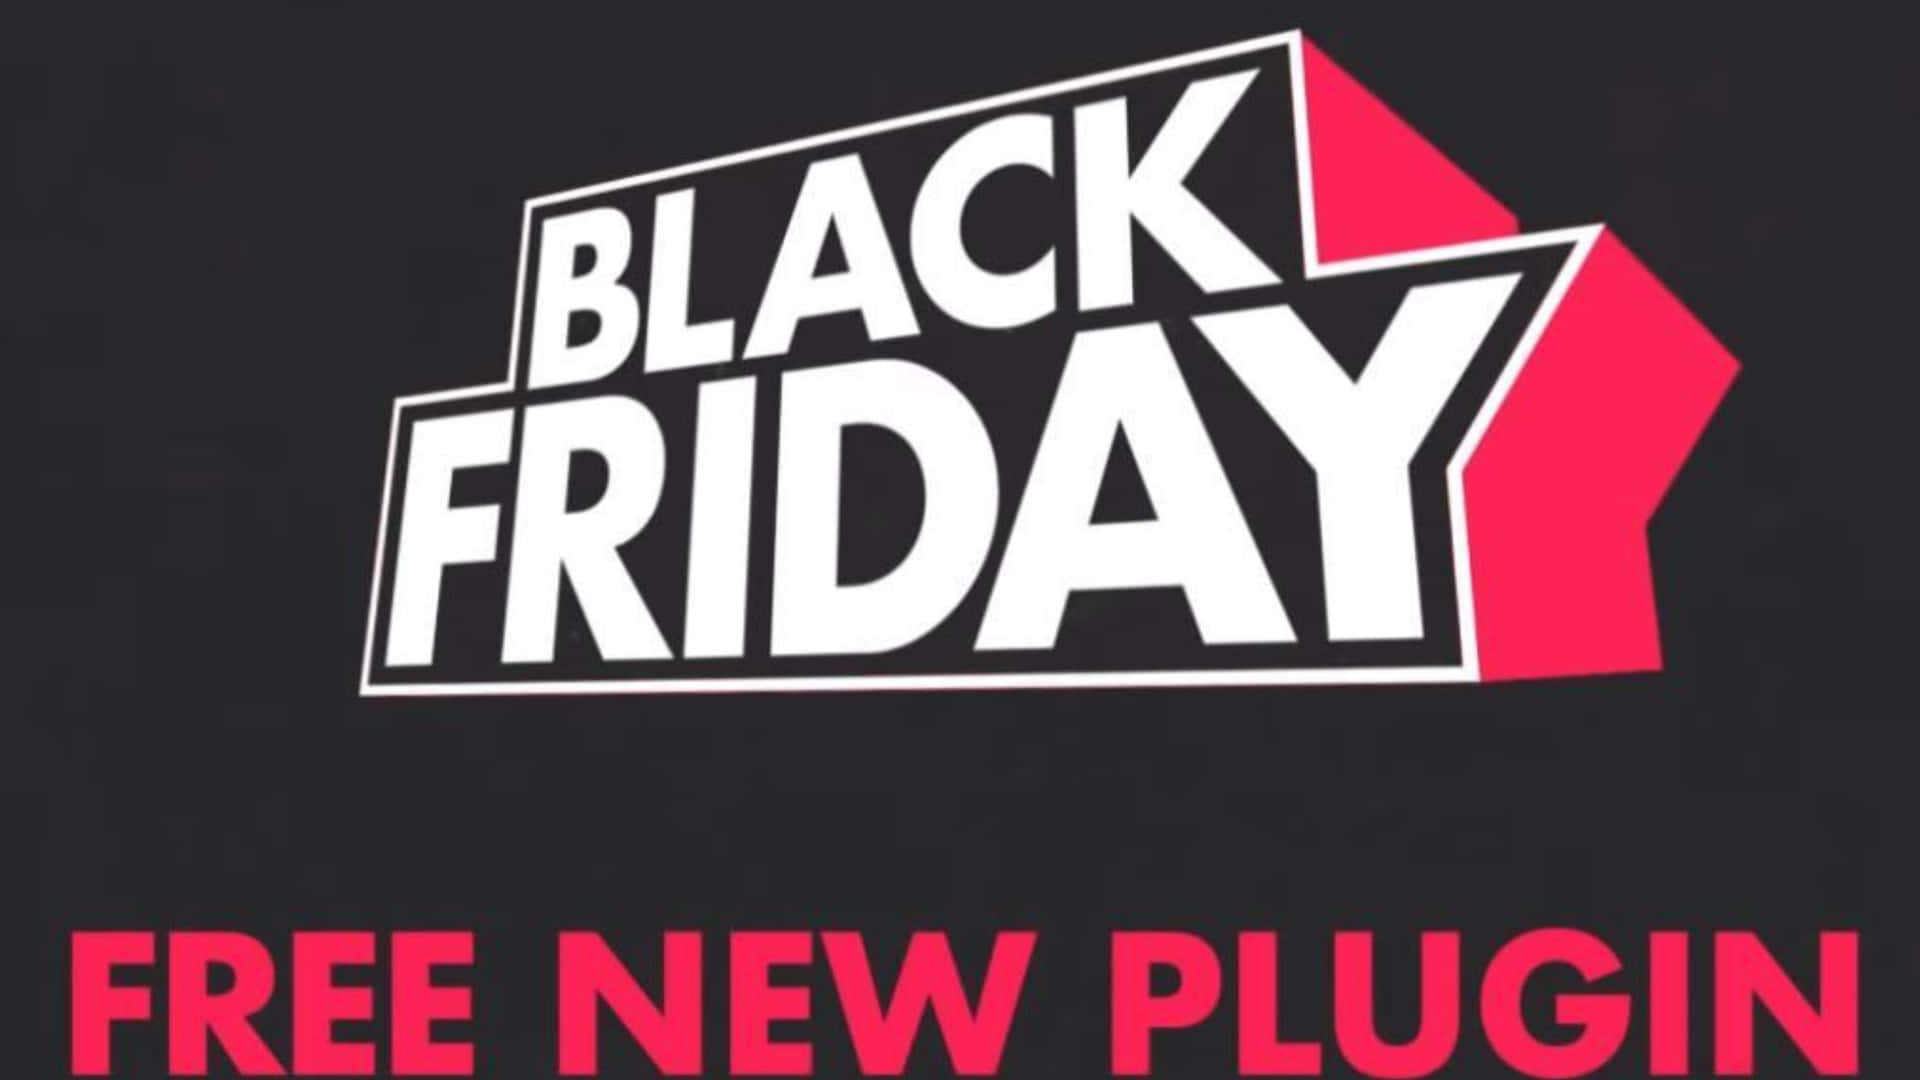 Get Ready for Black Friday Deals!